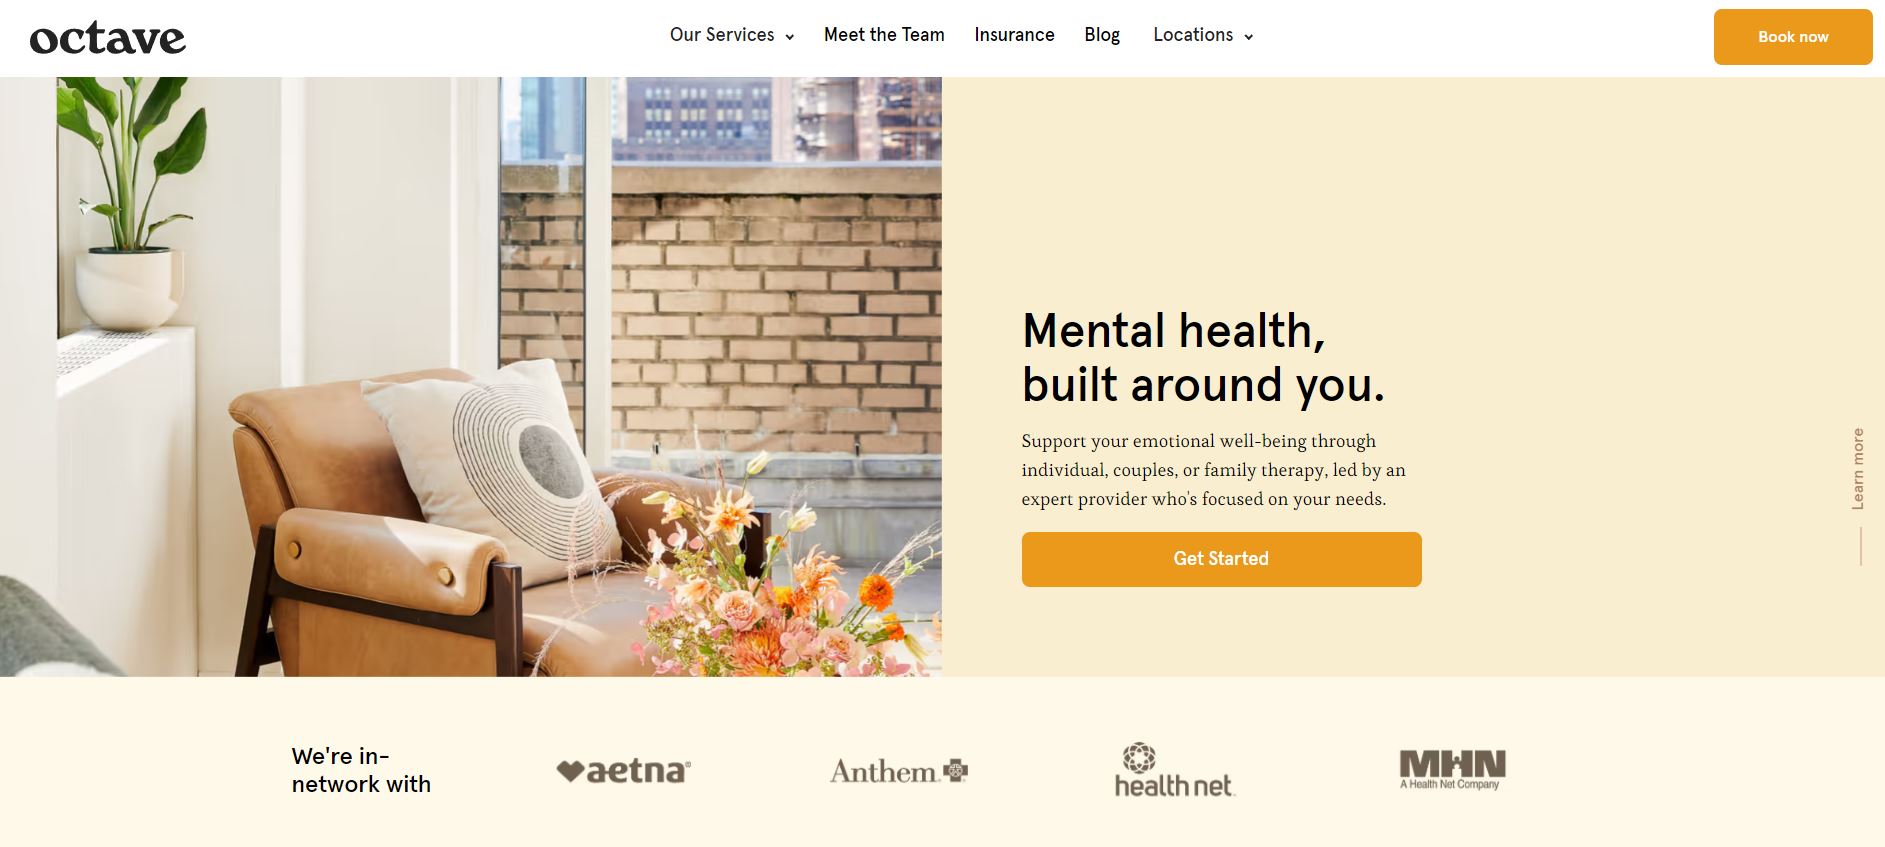 With an impressive $52M raised in Series C funding, Octave is revolutionizing the way people access and experience mental health support